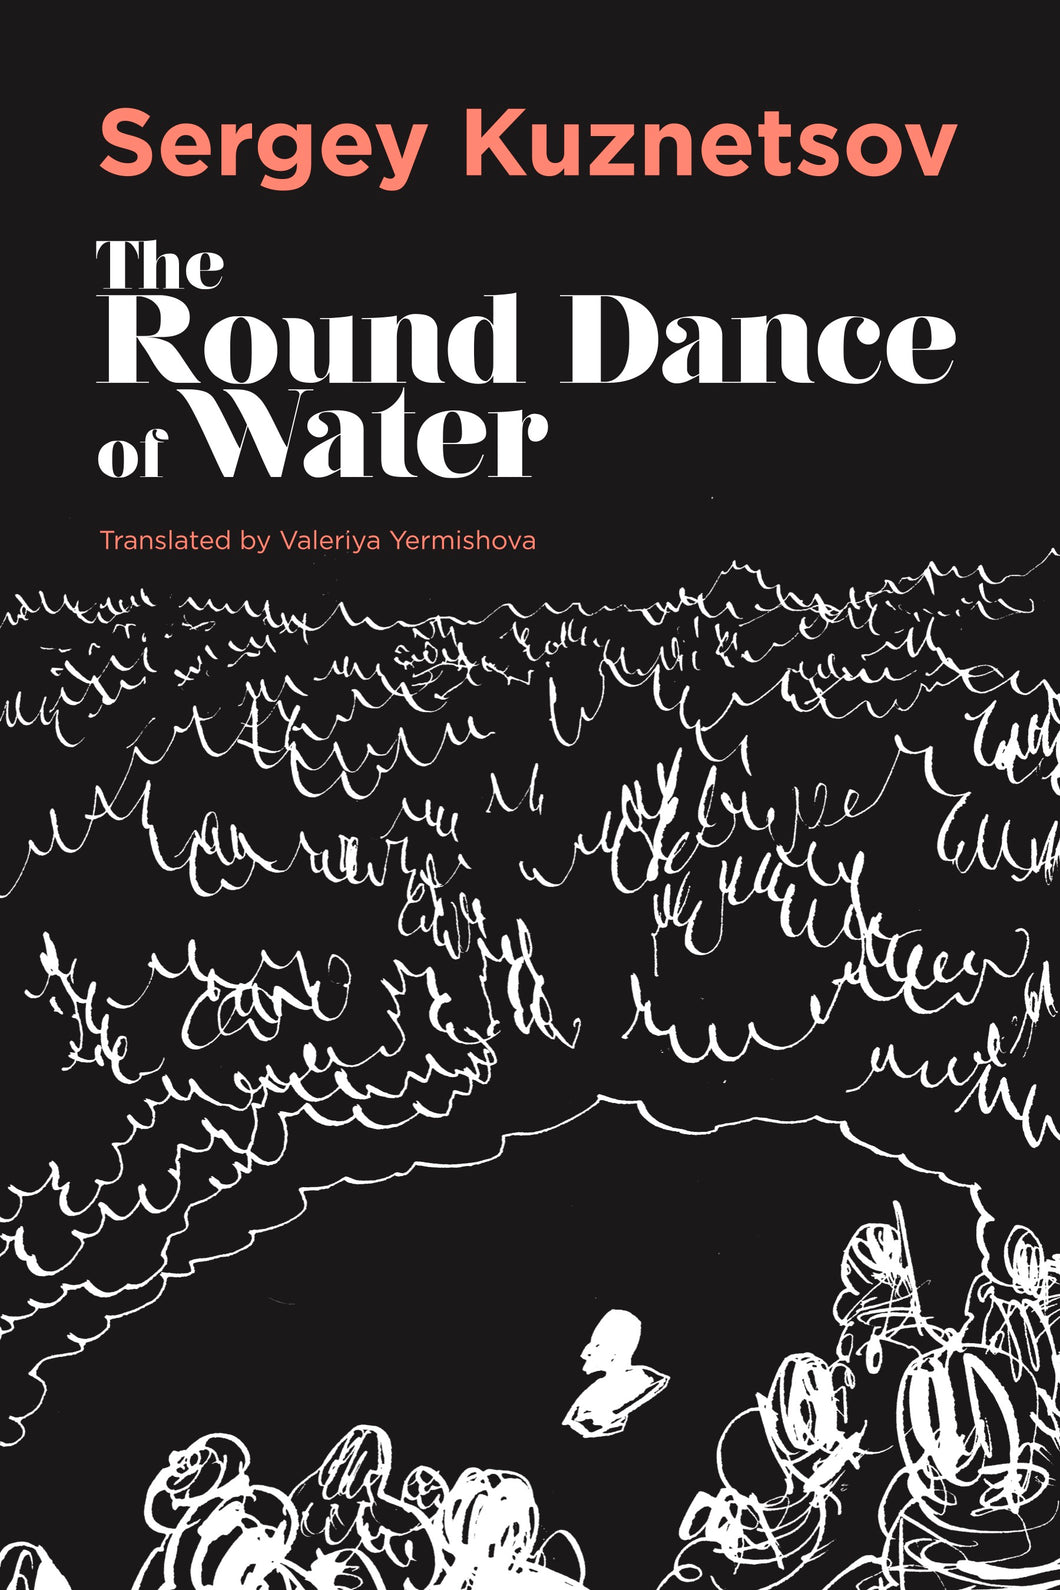 The Round Dance of Water